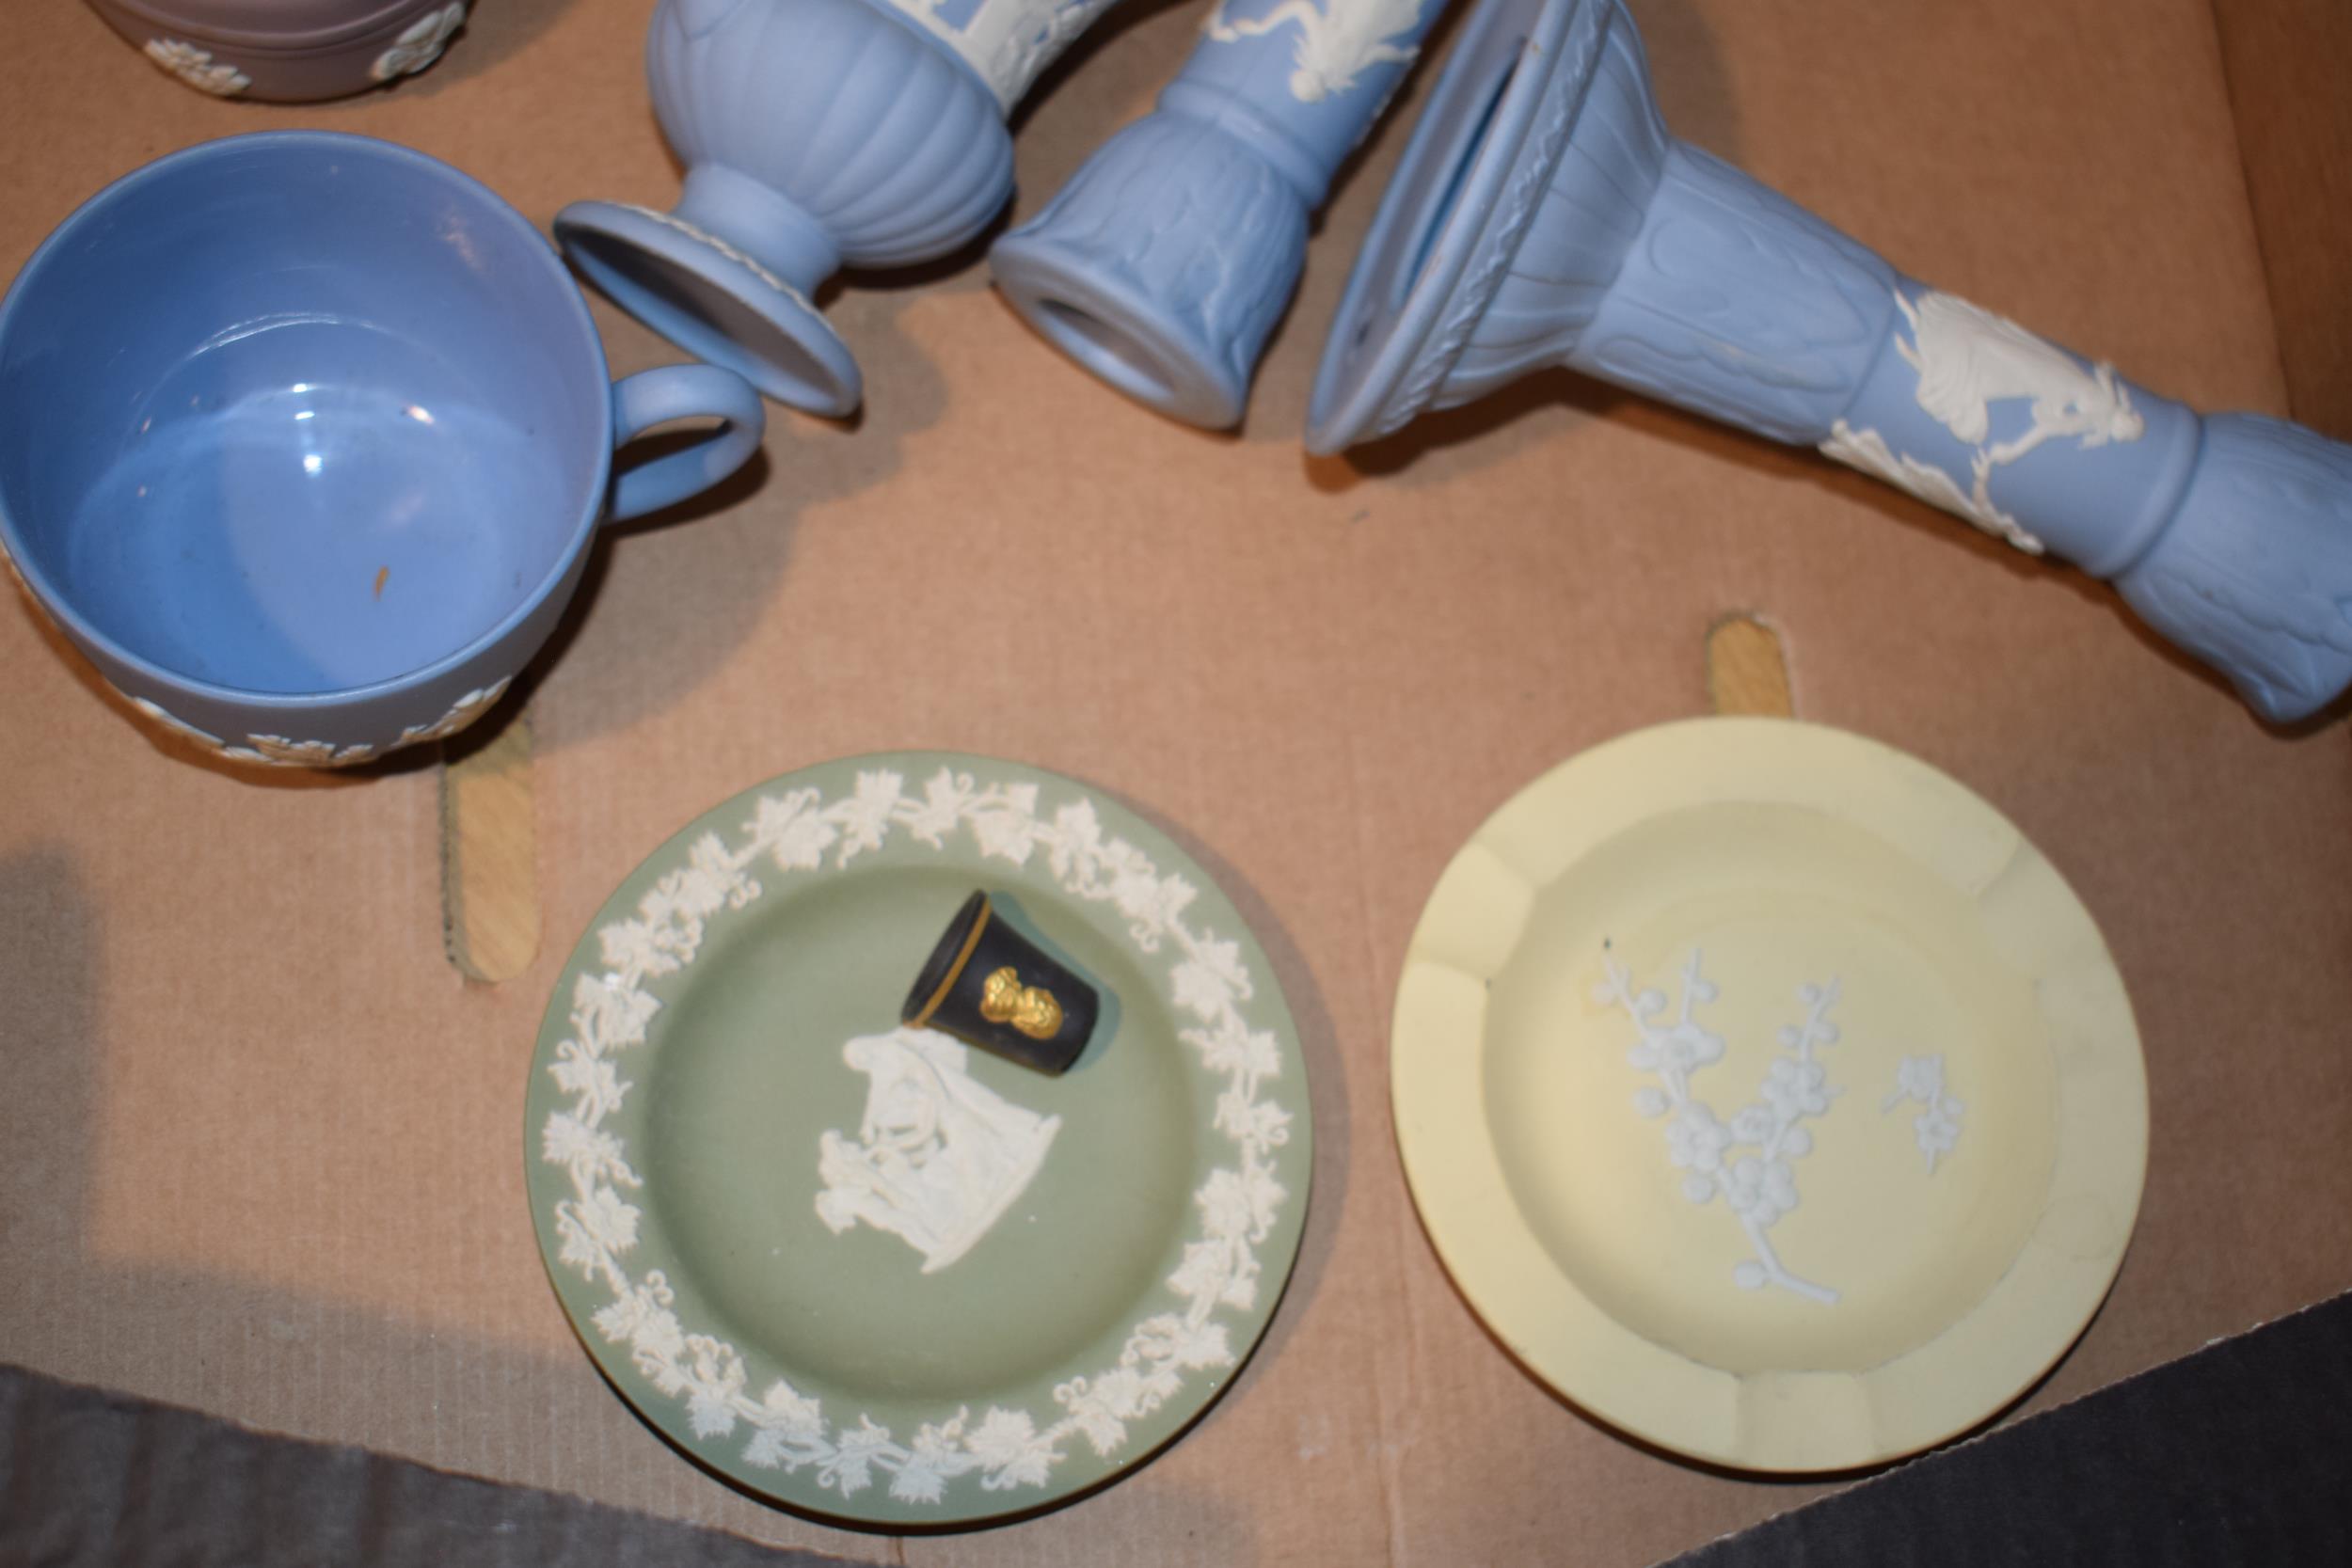 Wedgwood Jasperware in colours such as yellow, lilac, to include Dancing Hours candlesticks and - Image 4 of 4